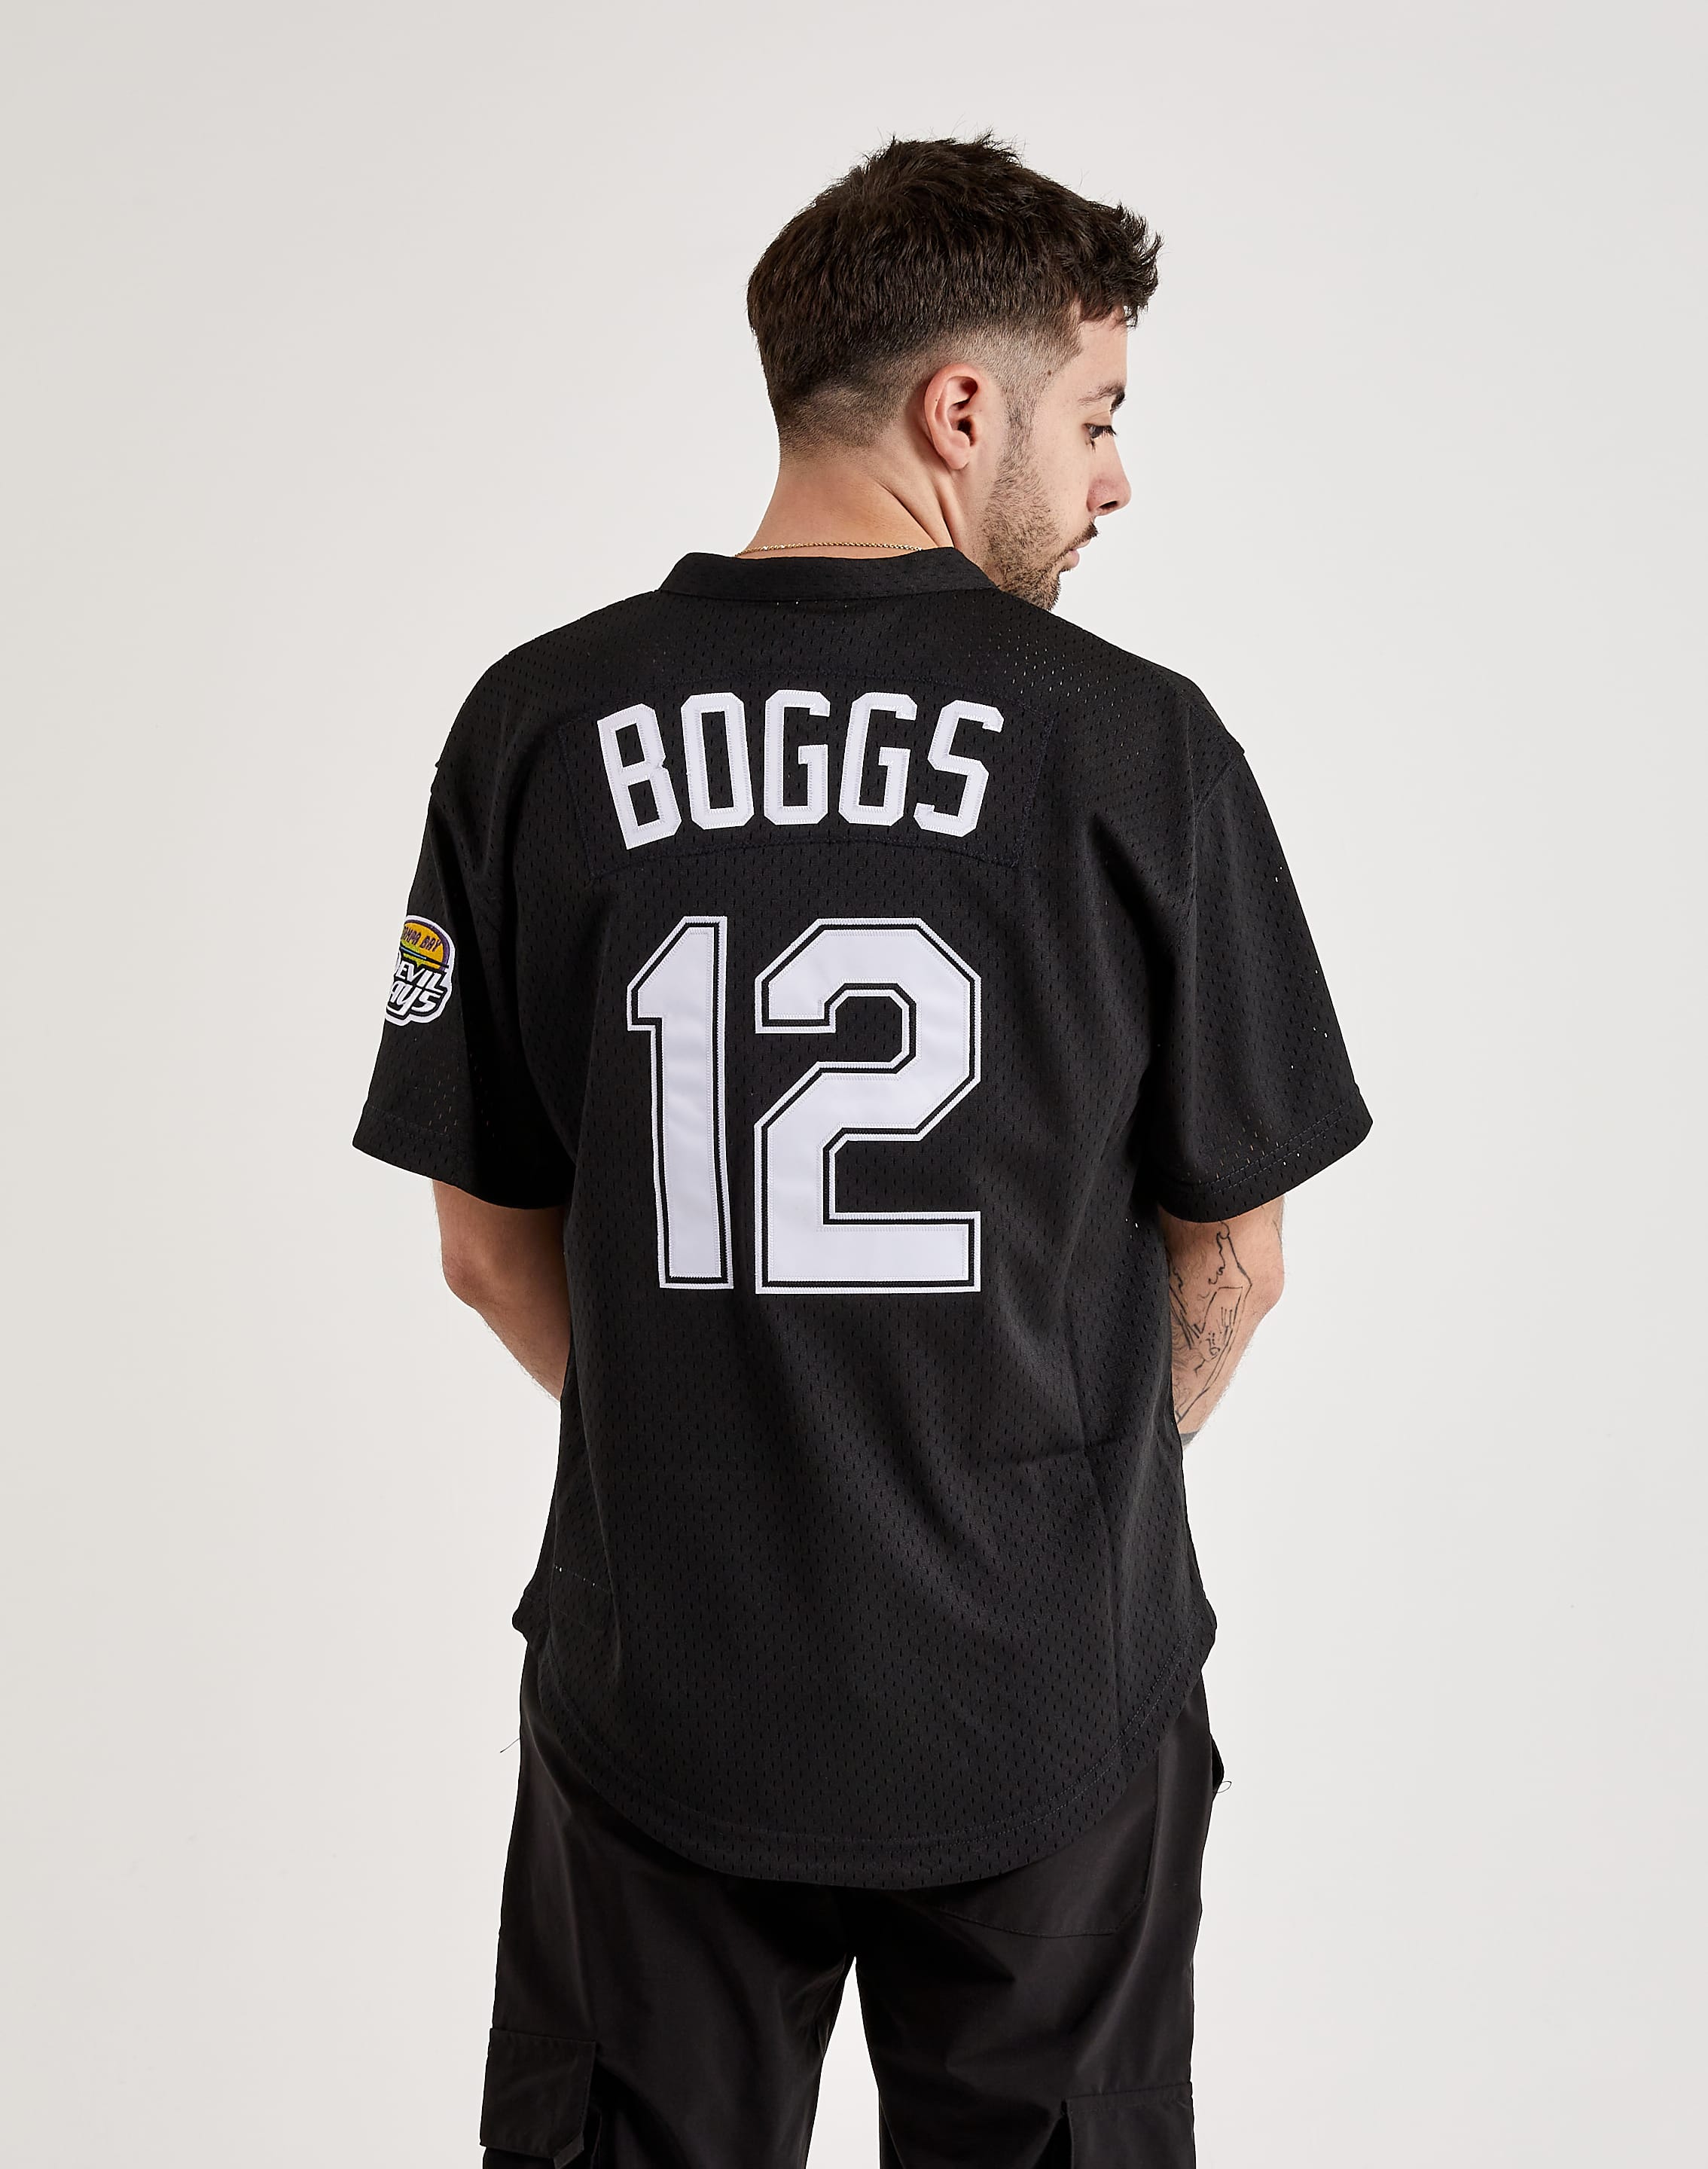 Mitchell & Ness Tampa Bay Rays Black Wade Boggs 1998 Authentic Batting  Practice Pullover Jersey